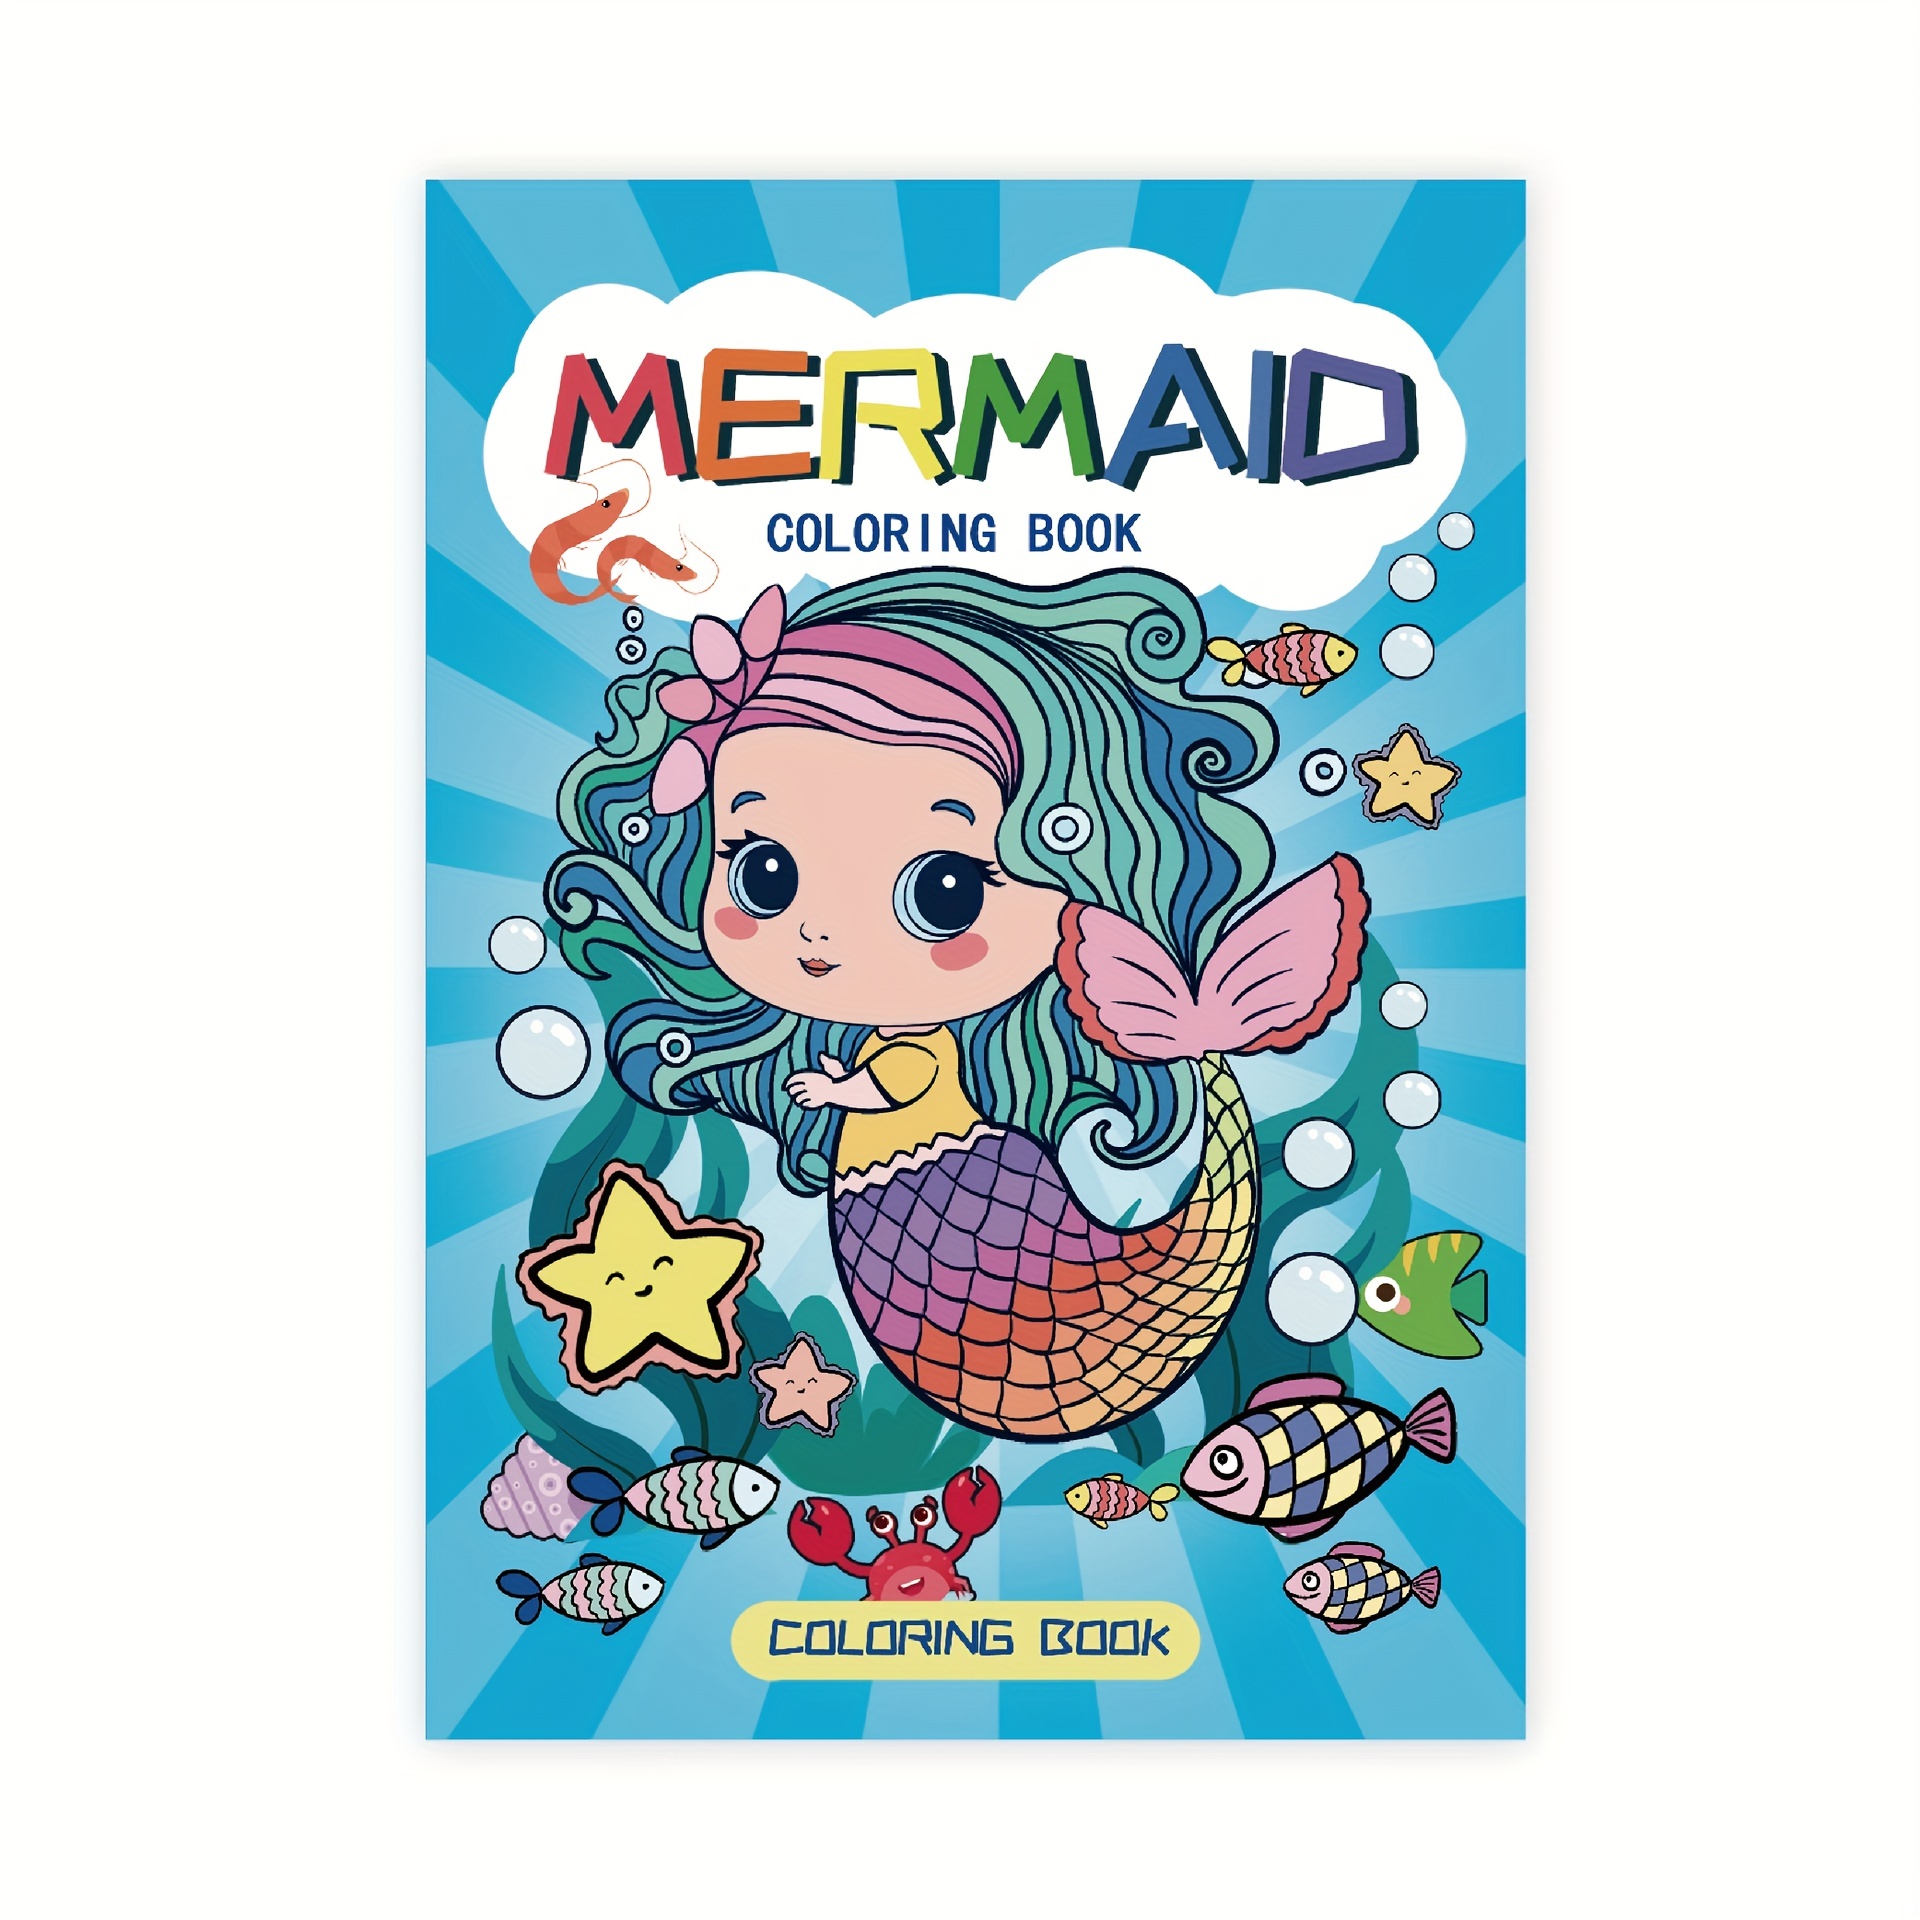 Mermaid Coloring Book For Adults: Magical Coloring Book For Girls, Women  For Stress Relief (Paperback), Blue Willow Bookshop